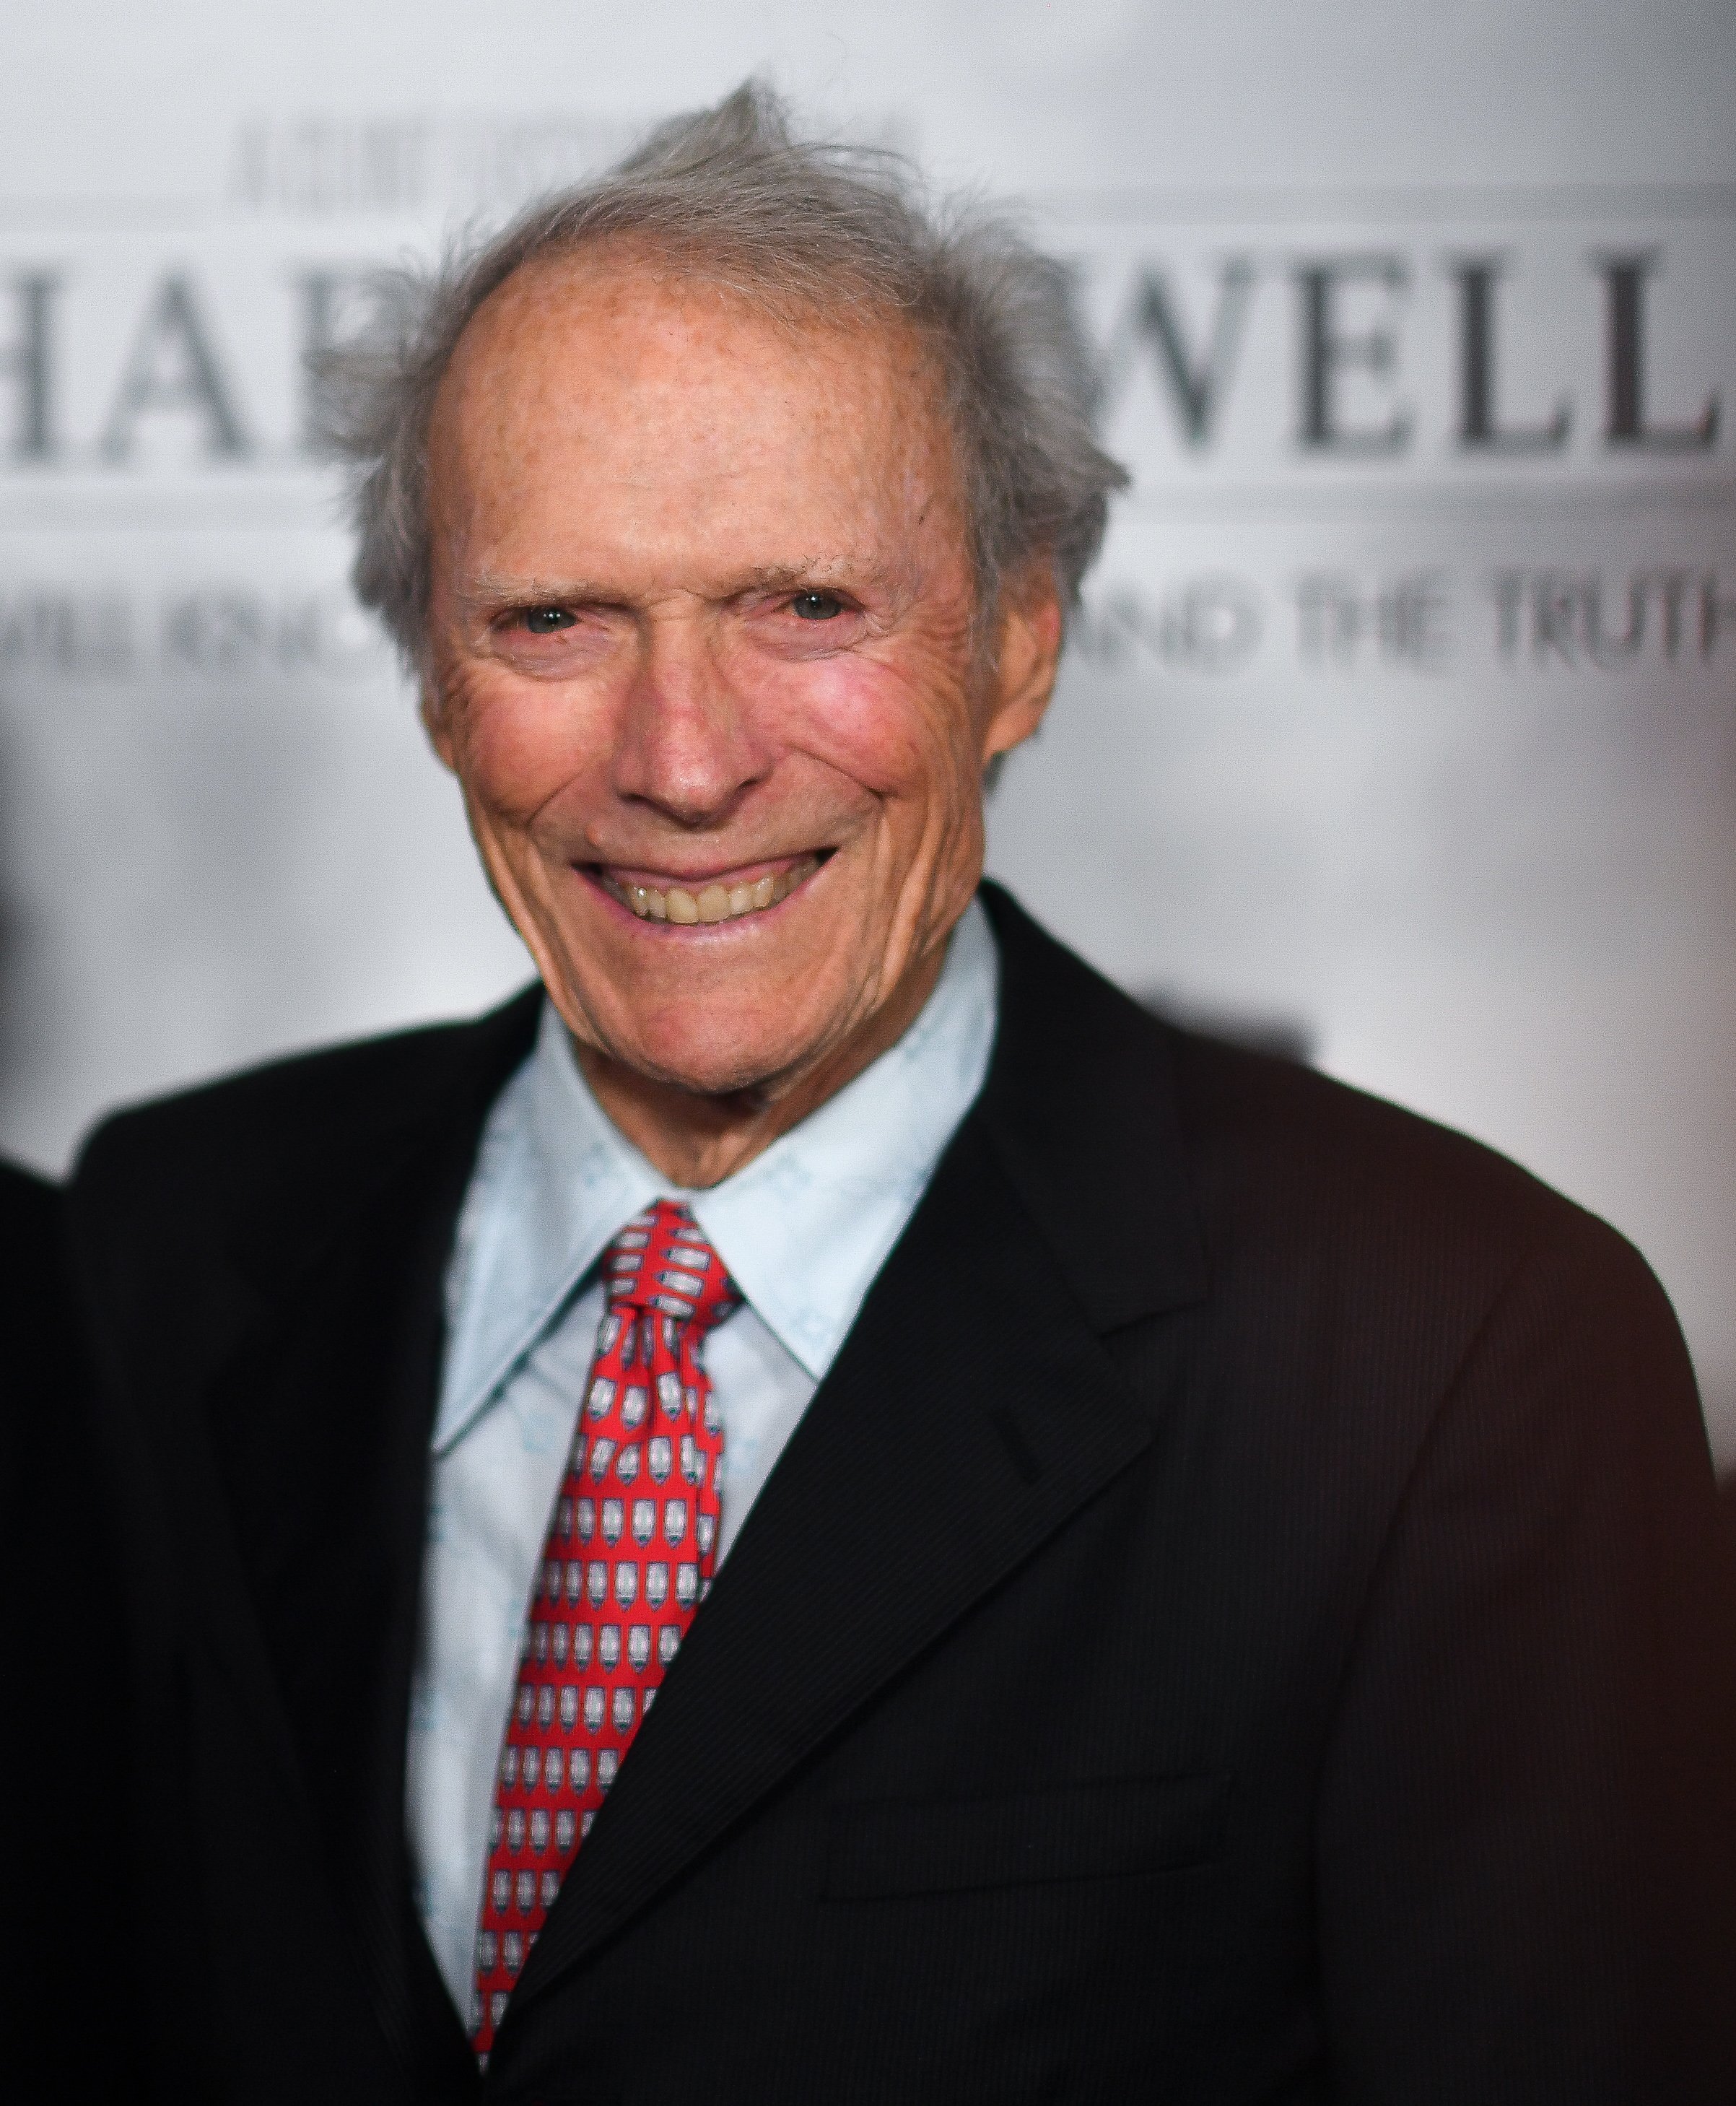 Clint Eastwood attends the "Richard Jewell" Atlanta Screening at Rialto Center of the Arts on December 10, 2019 in Atlanta, Georgia | Photo: Getty Images